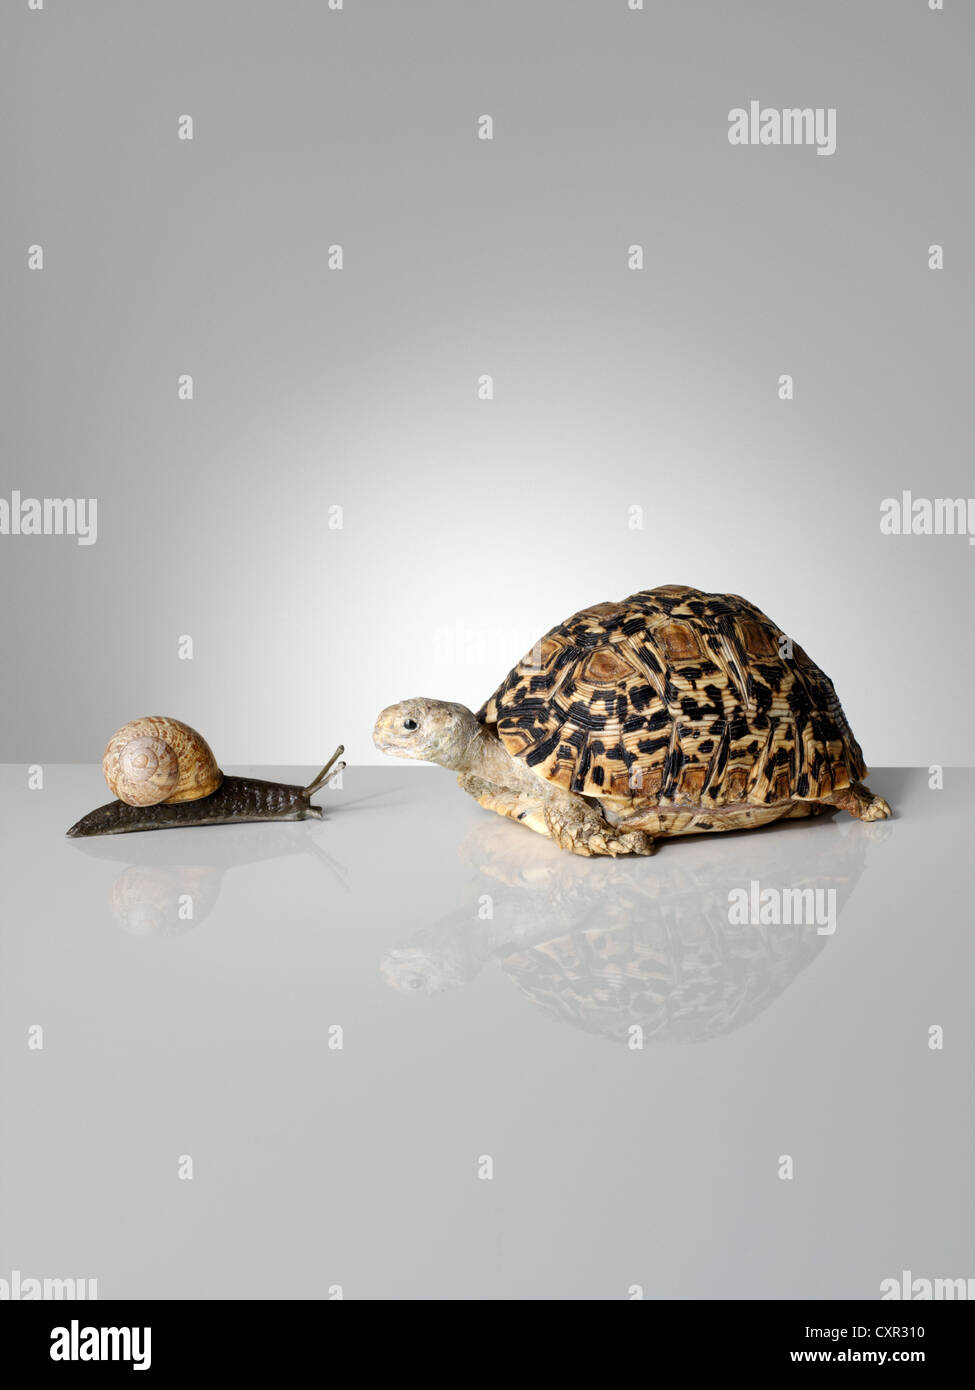 Snail and tortoise Stock Photo